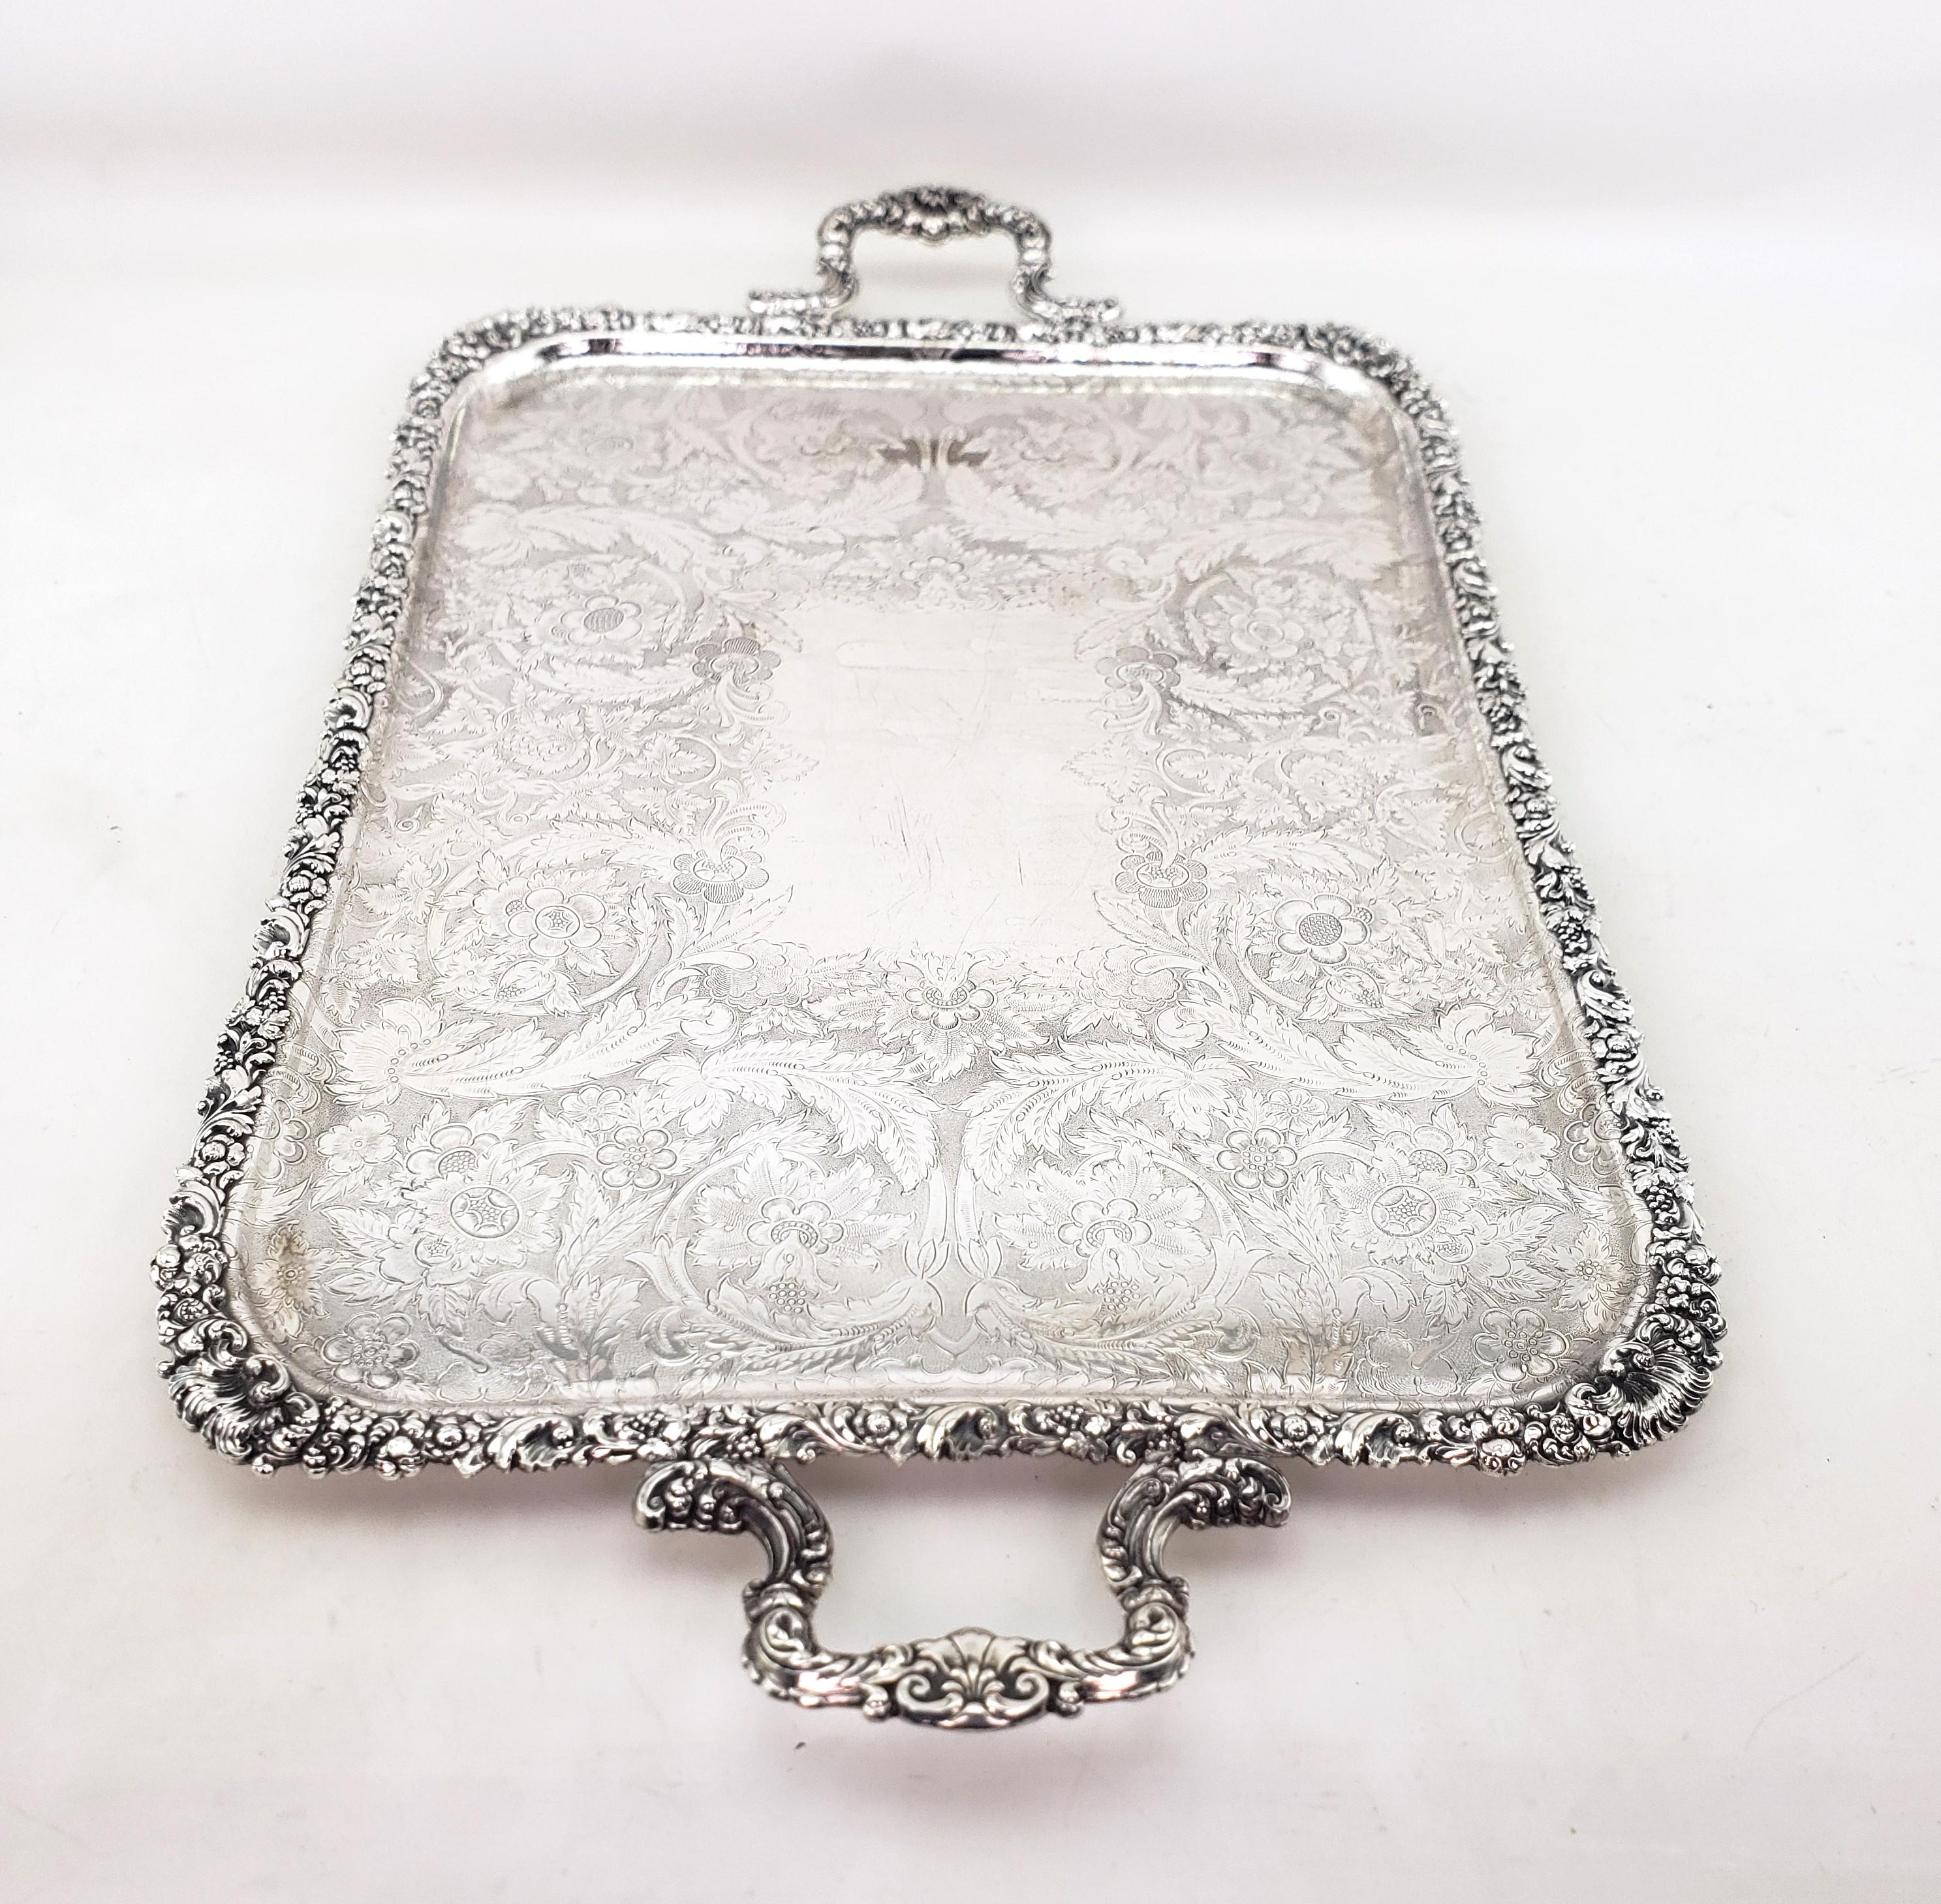 19th Century Large Antique Birks Silver Plated Serving Tray with Leaf & Berry Decoration For Sale